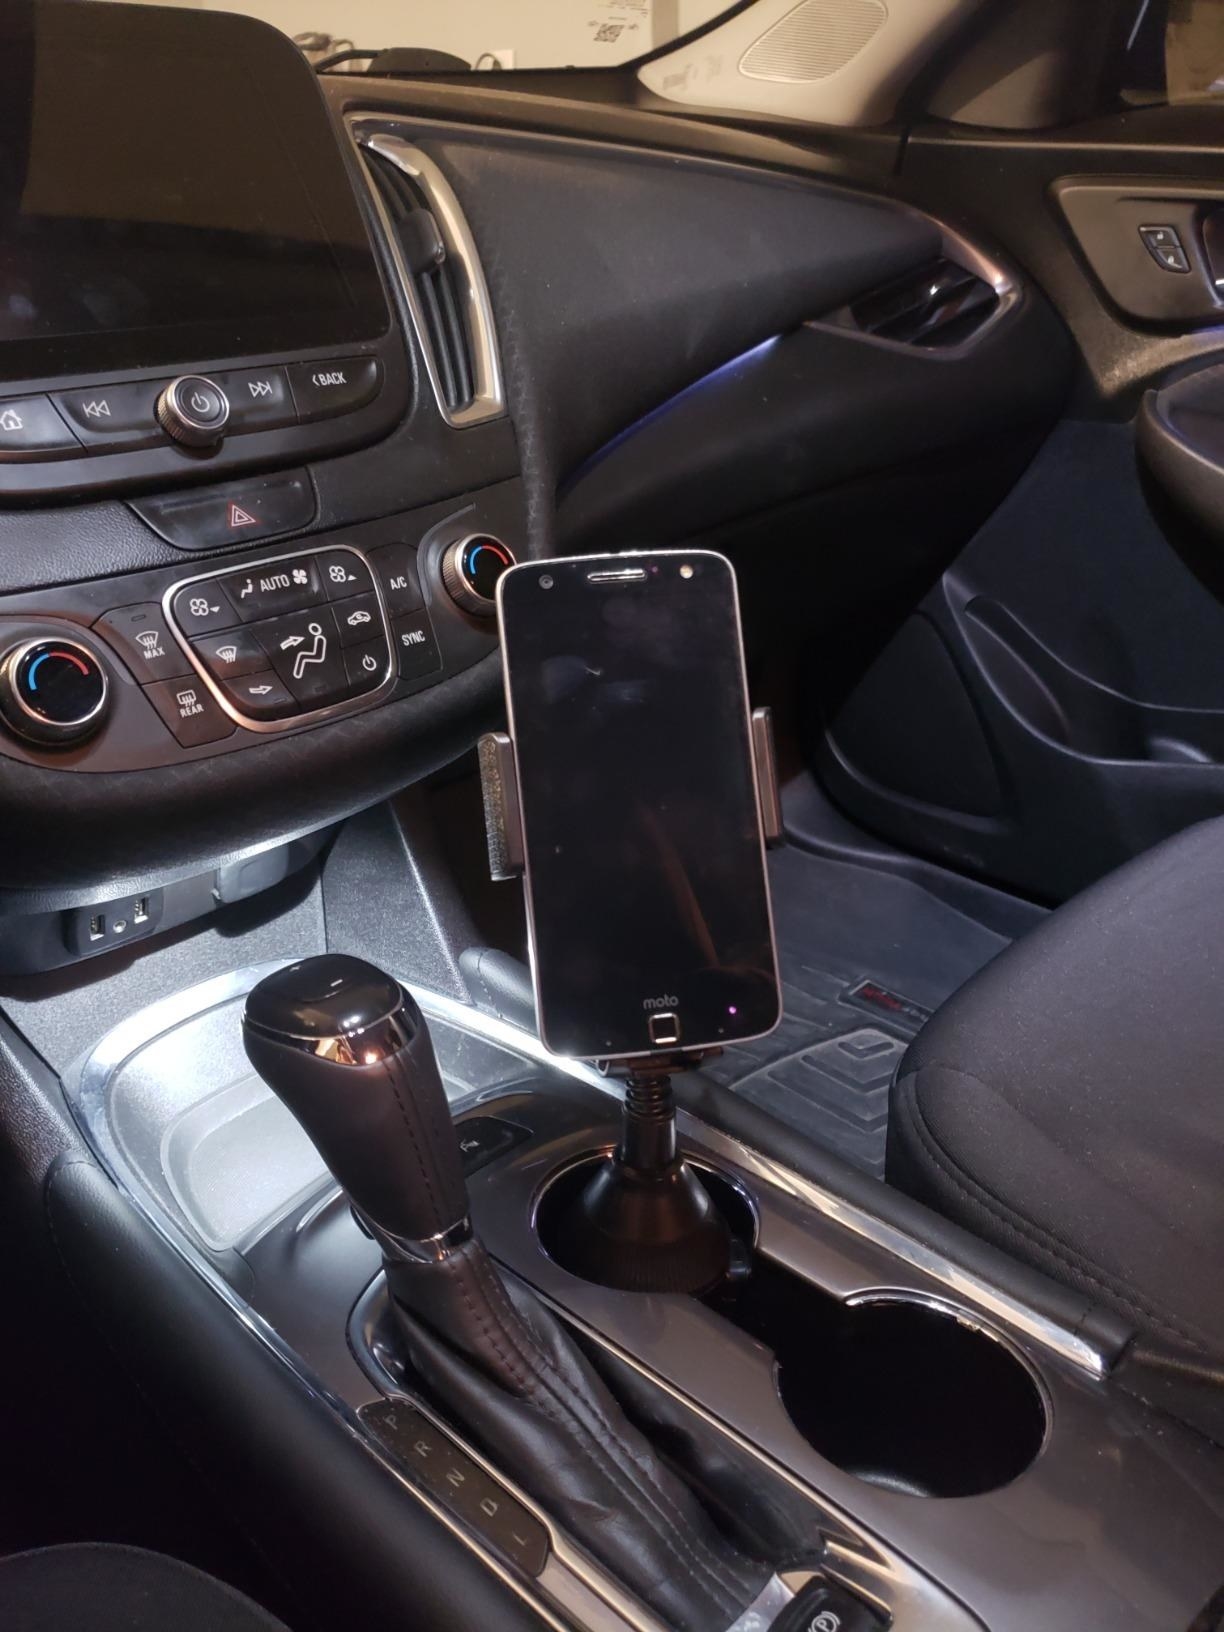 The phone mount in a reviewer's car cupholder